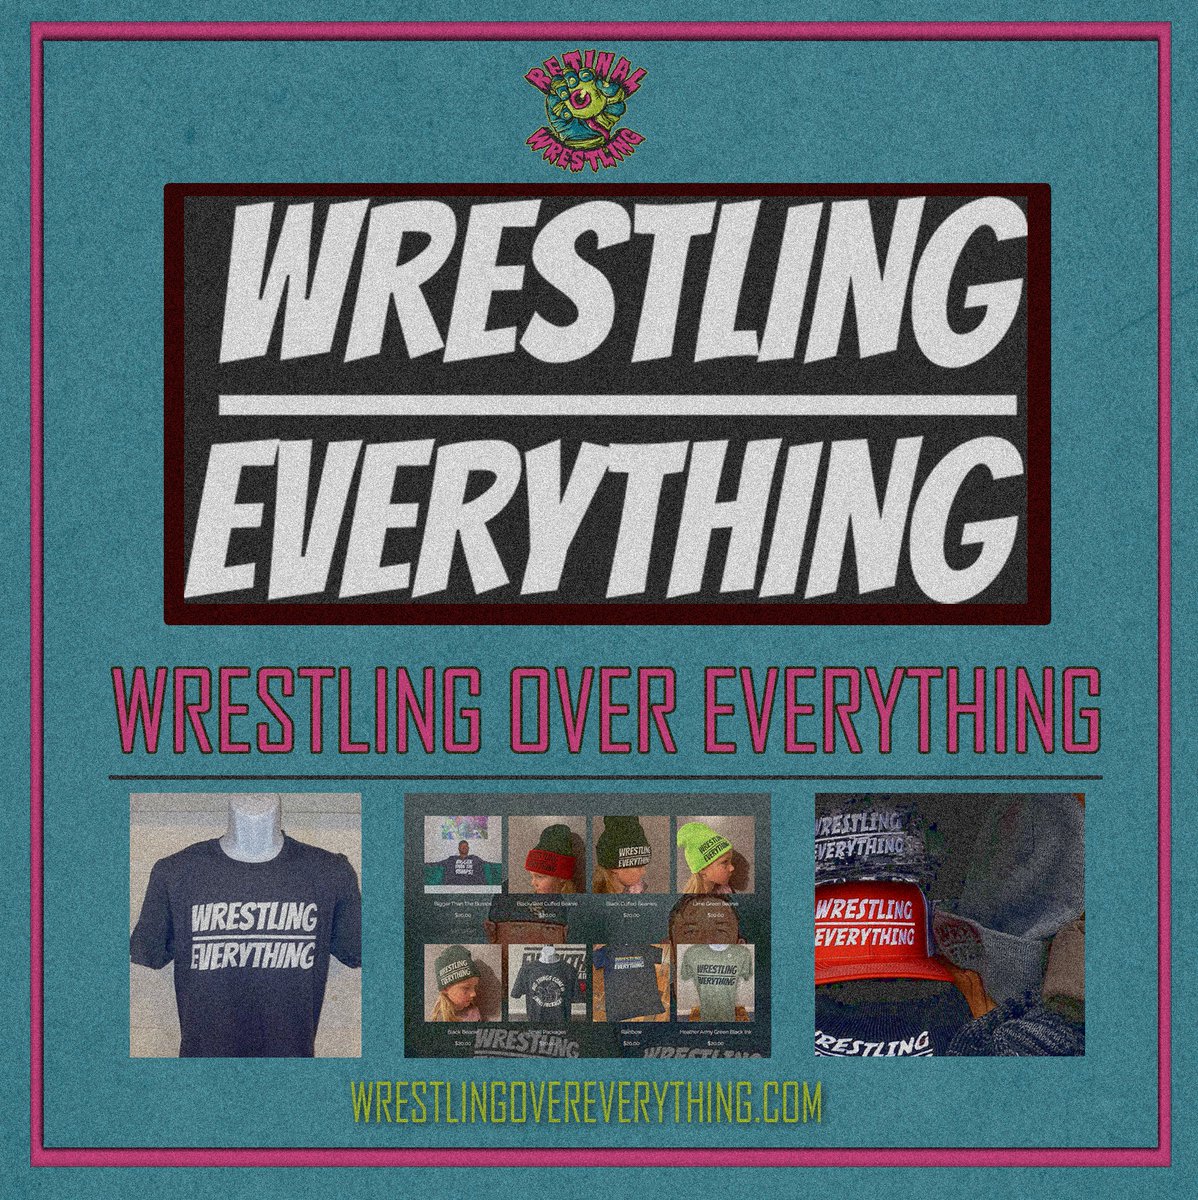 Big supporters in the independent wrestling scene......Retinal Wrestling welcomes 'Wrestling Over Everything' as one of our sponsors for our upcoming 
 April event. 

Tons of cool merch available on their site.
wrestlingovereverything.com

Make sure to drop by and support!

✋👁️